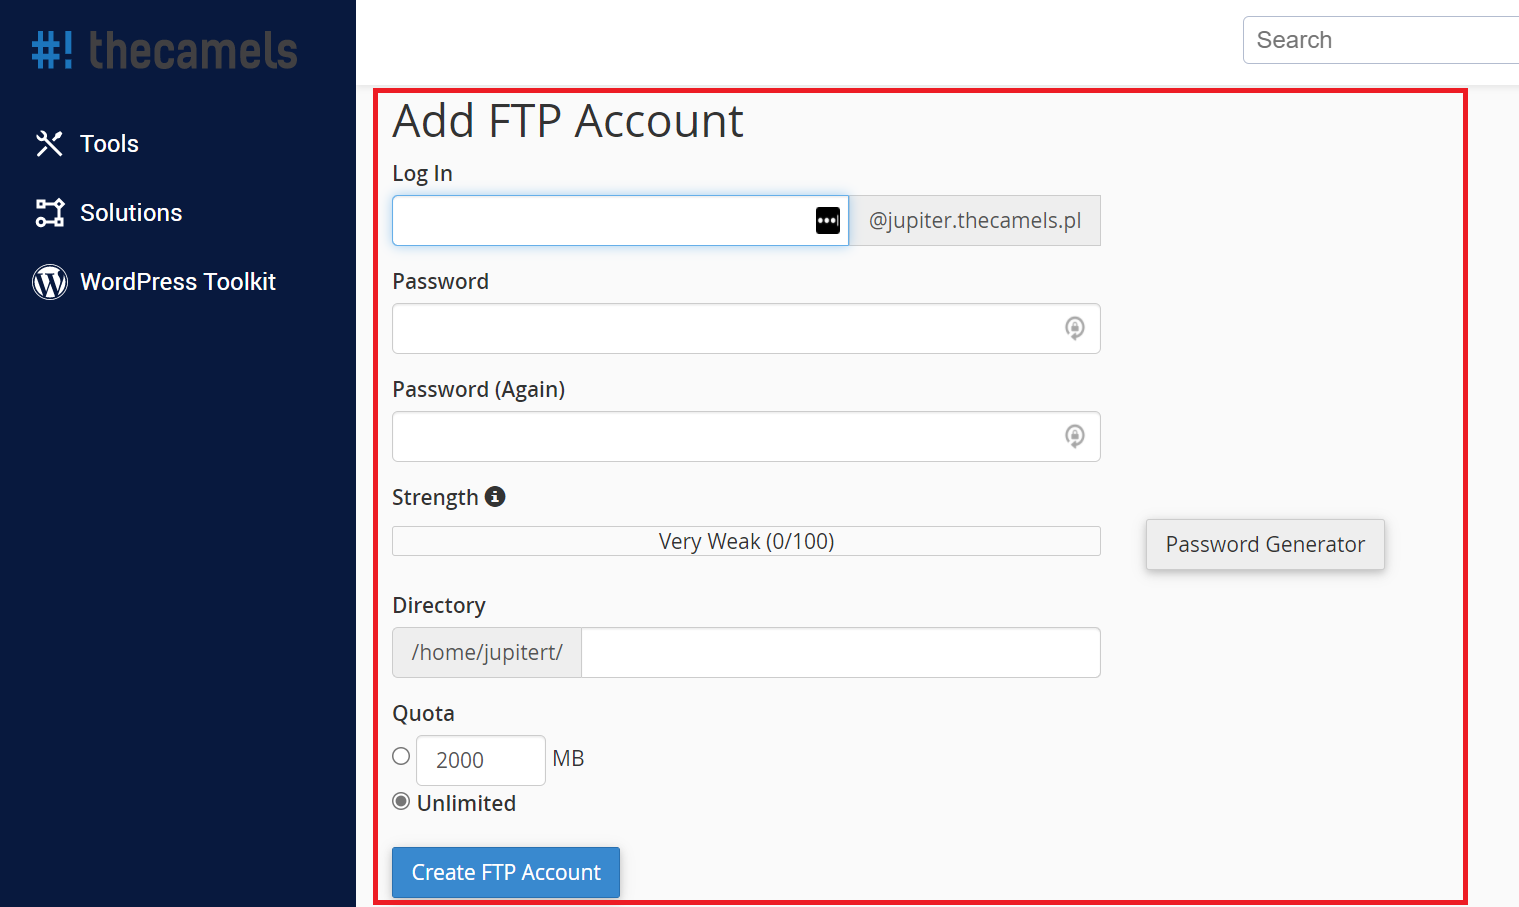 reating an FTP account - step 2